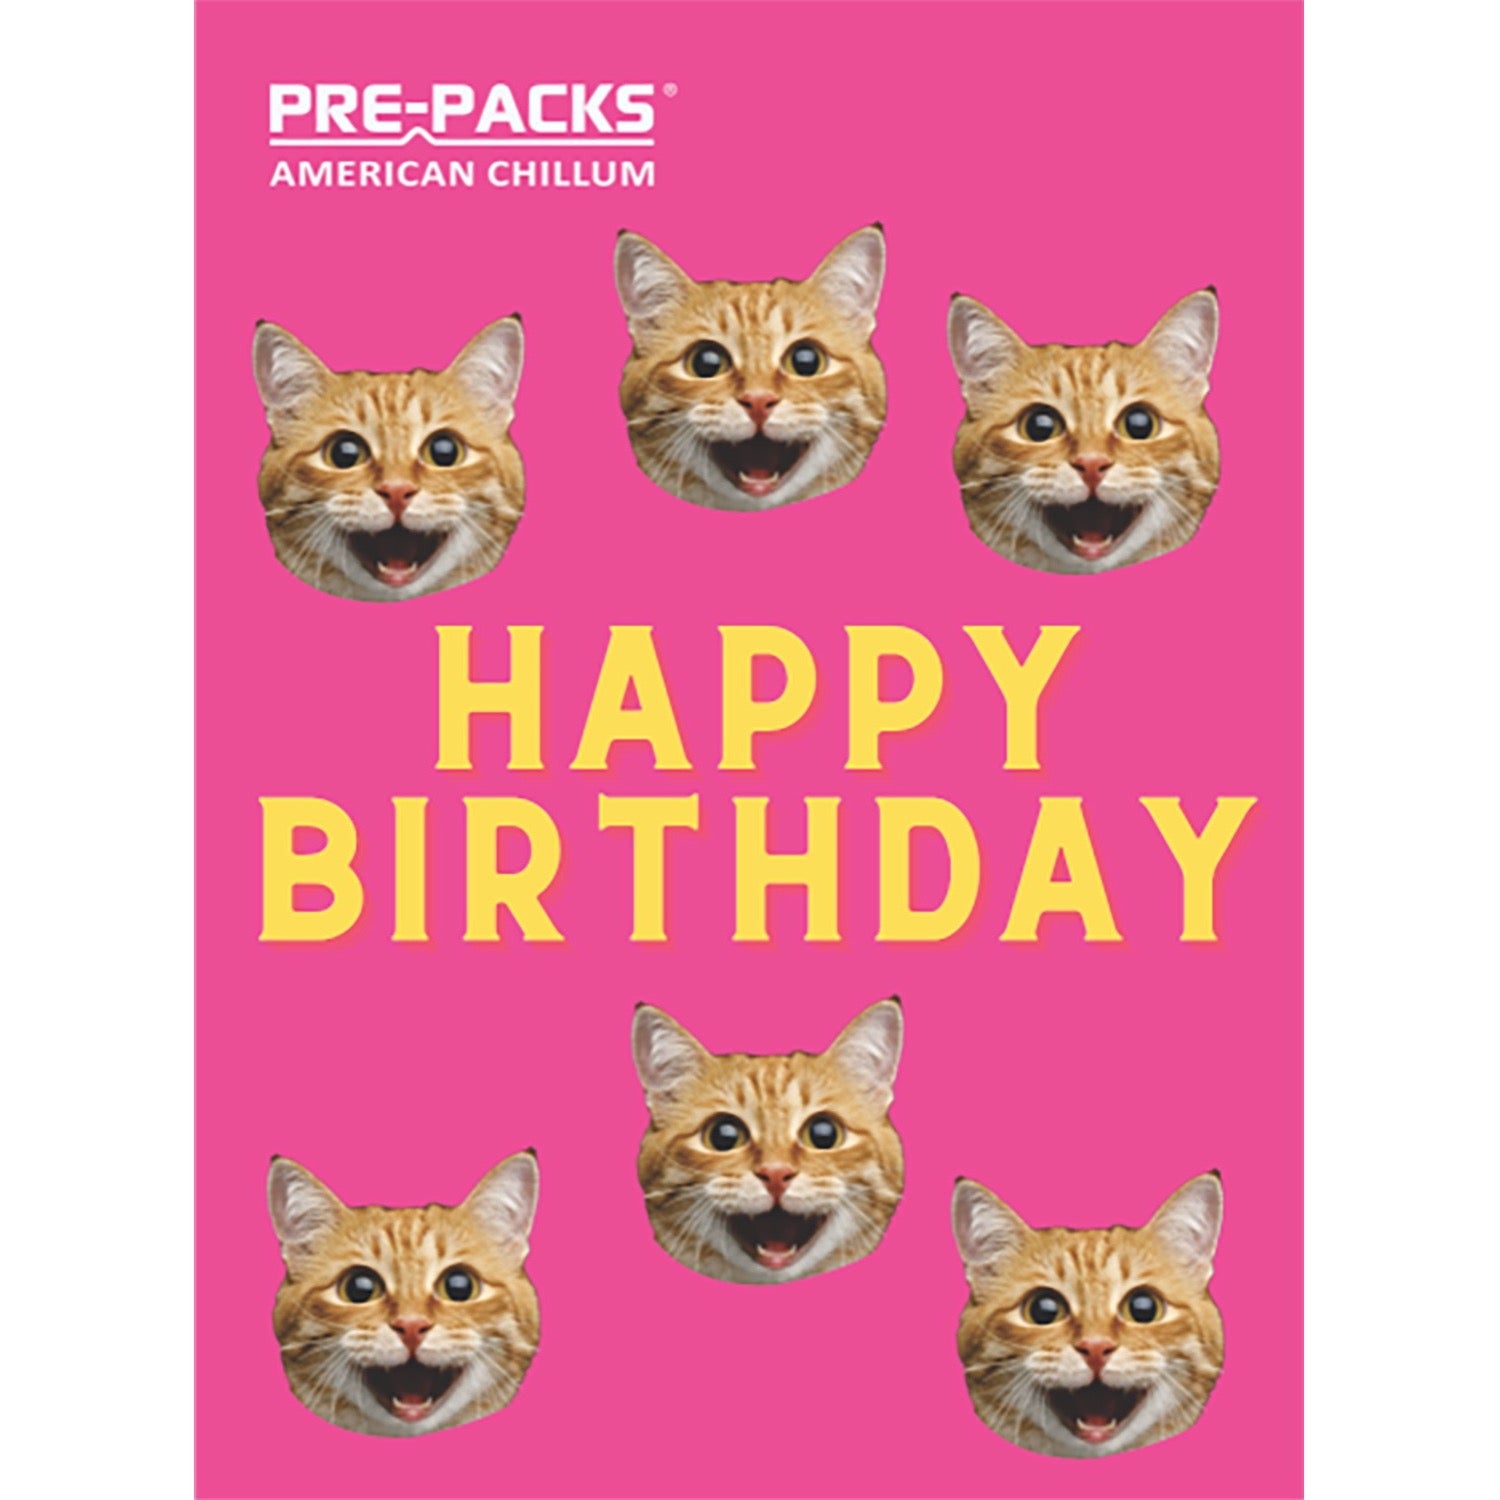 Meow-tiful Birthday Wishes Celebrate Pre-Made Chillums